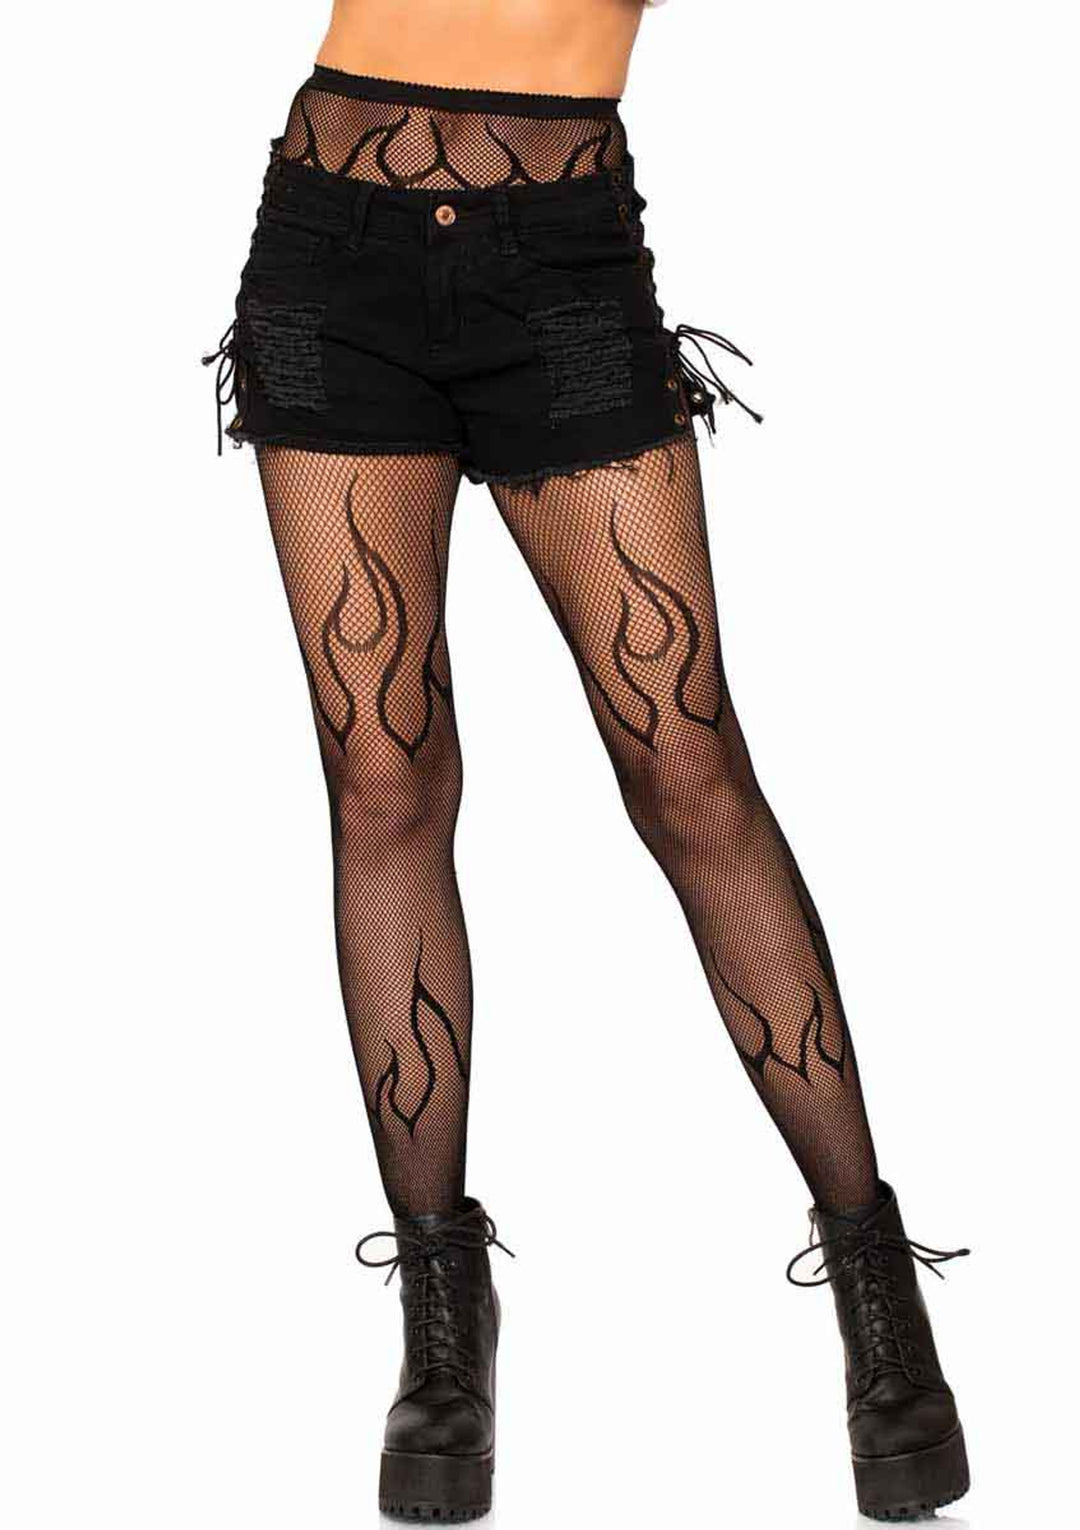 Flame Net Fishnet Tights from Leg Avenue